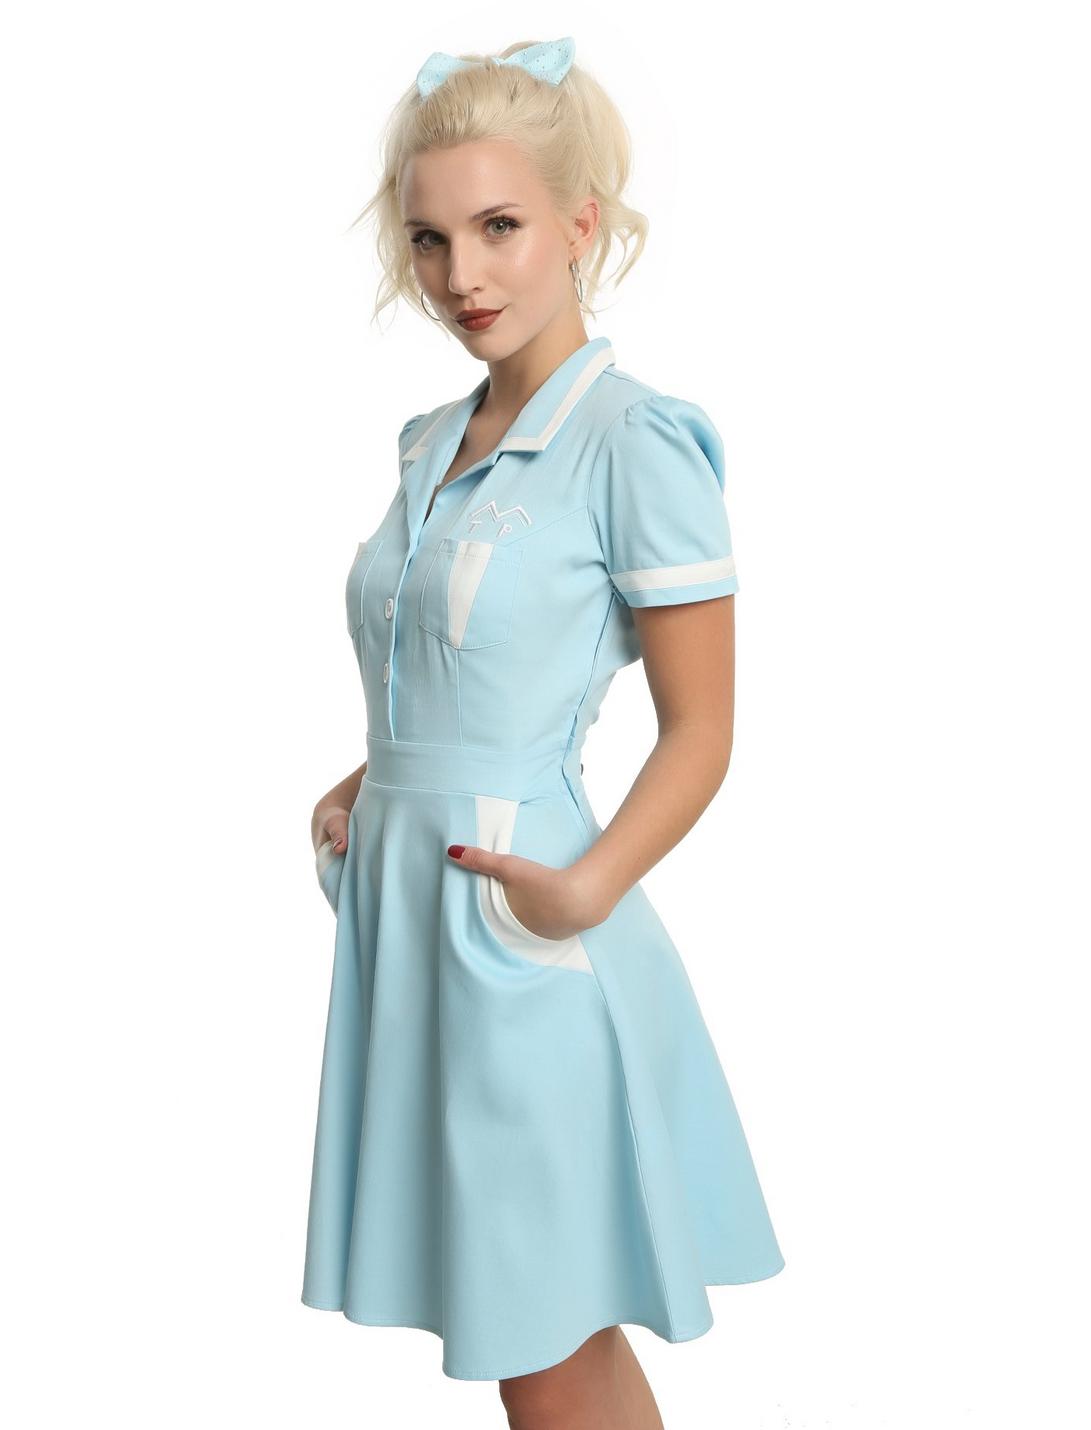 Twin Peaks Double R Diner Waitress Cosplay Dress, MULTI, hi-res